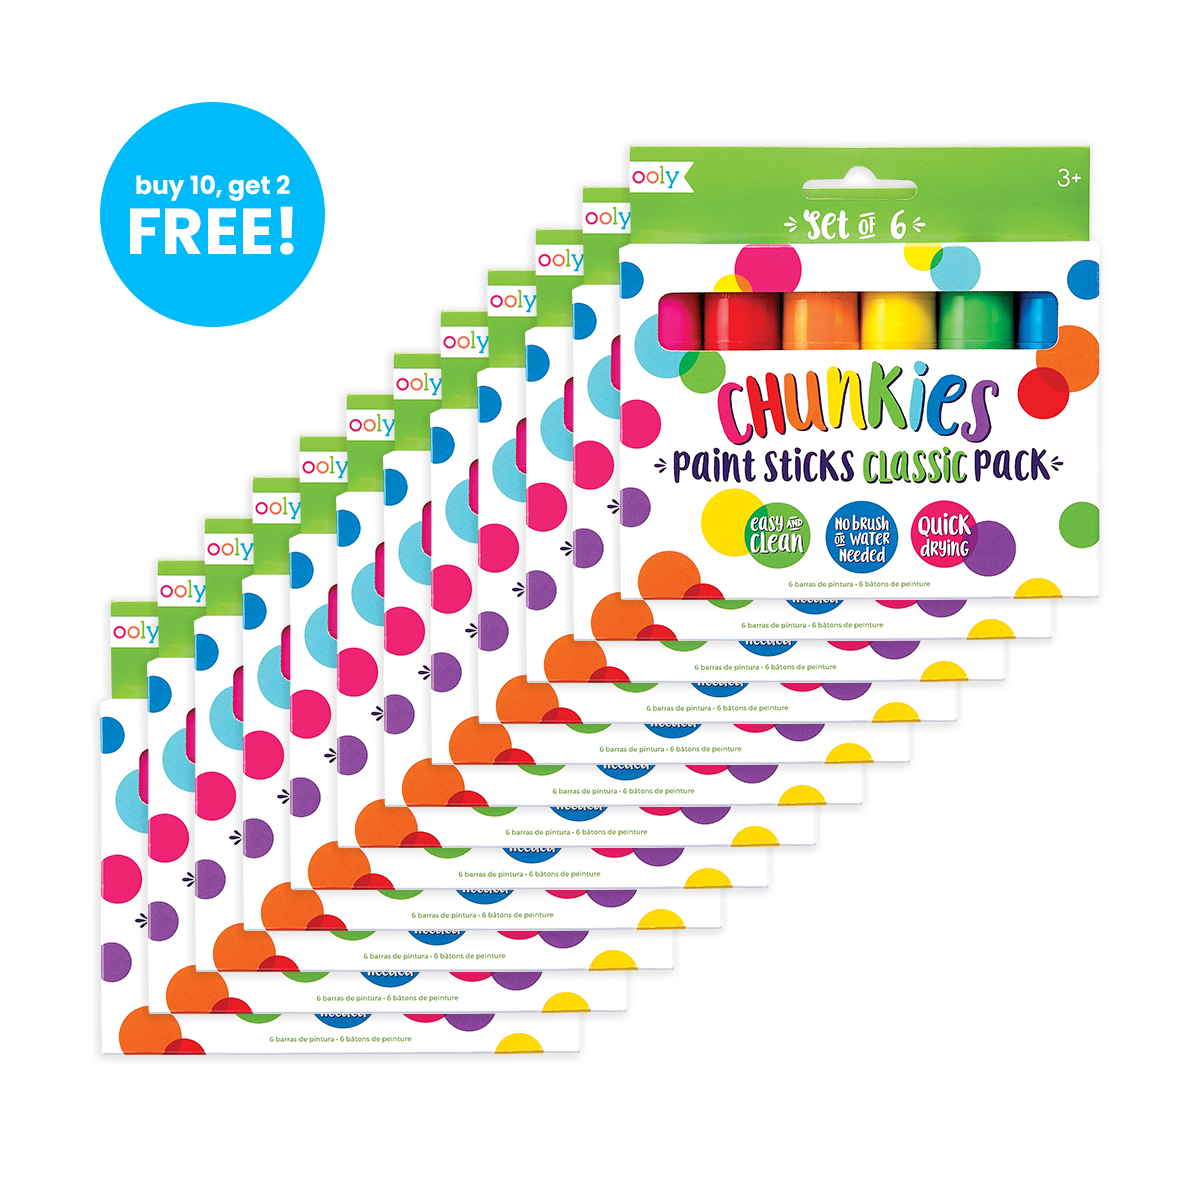 OOLY Chunkies Paint Sticks - Classic Set of 12 – Yonder